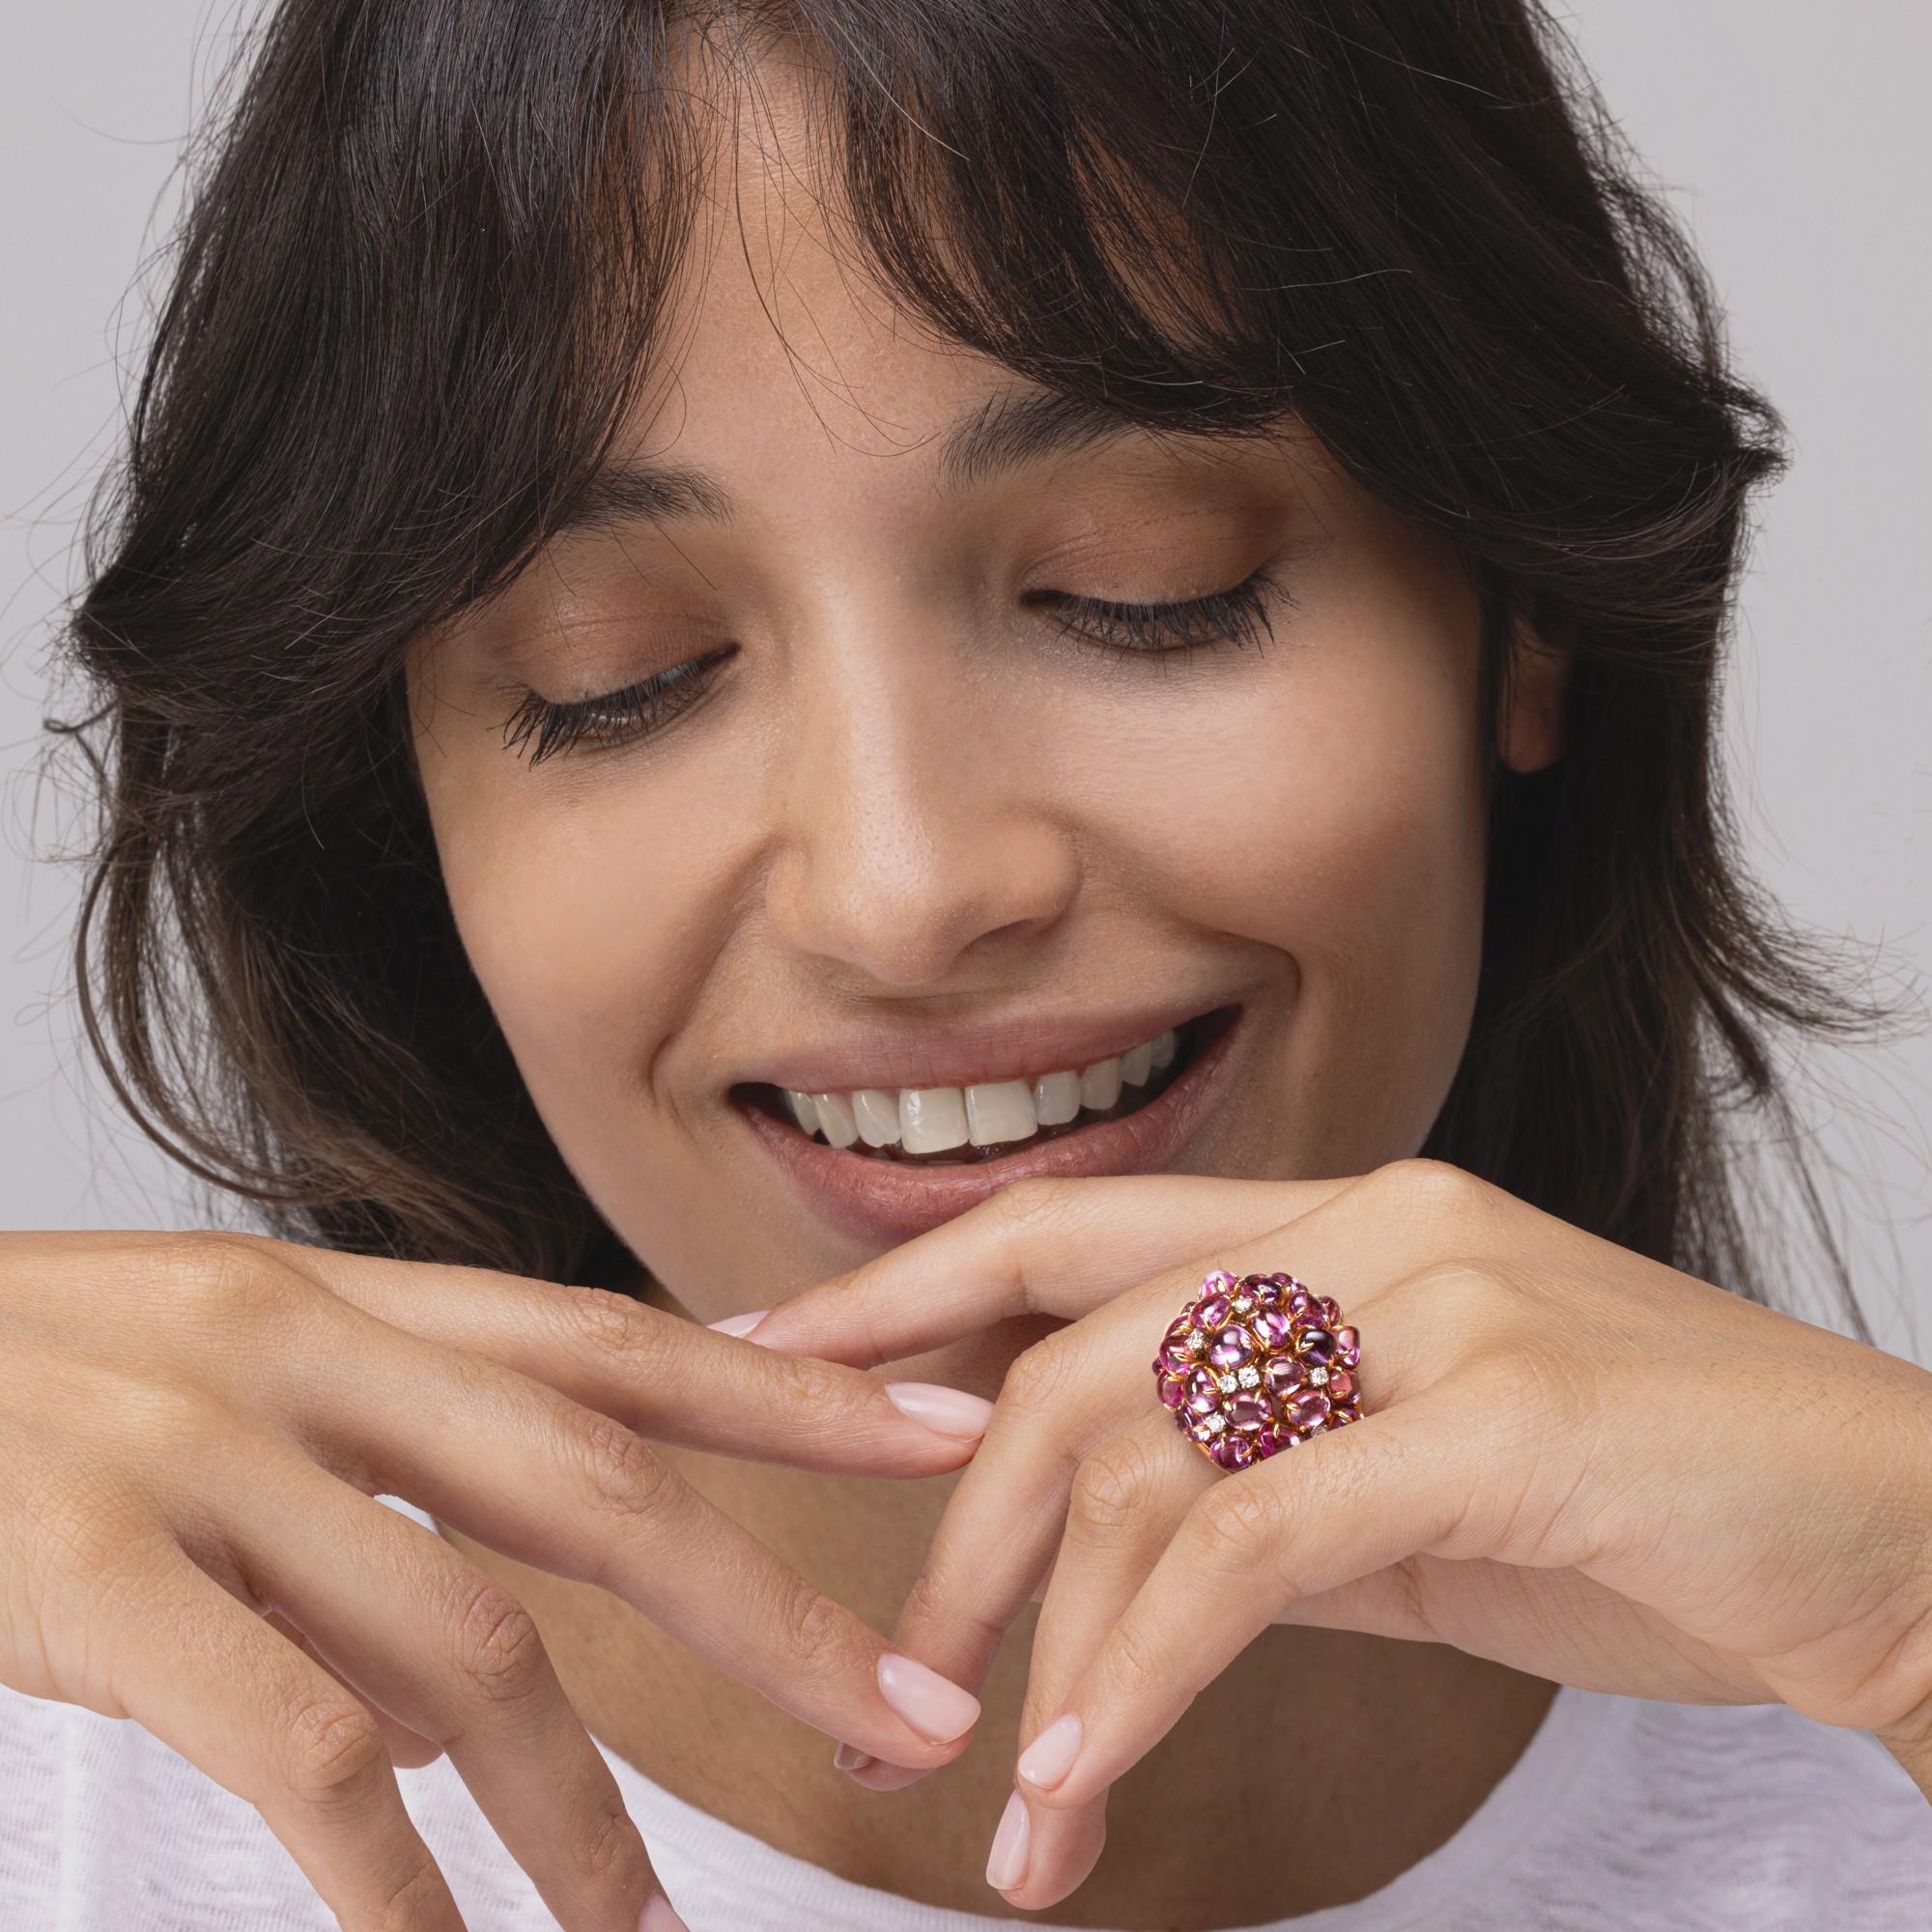 A uniquely hand crafted in Italy dome ring by Alex Jona, featuring 23,02 carats of cabochon cut pink sapphires of multiple shapes and sizes, 0.50 carats of brilliant cut diamonds set in 18K rose gold. Ring size US 6.5- EU 12. Can be sized to any